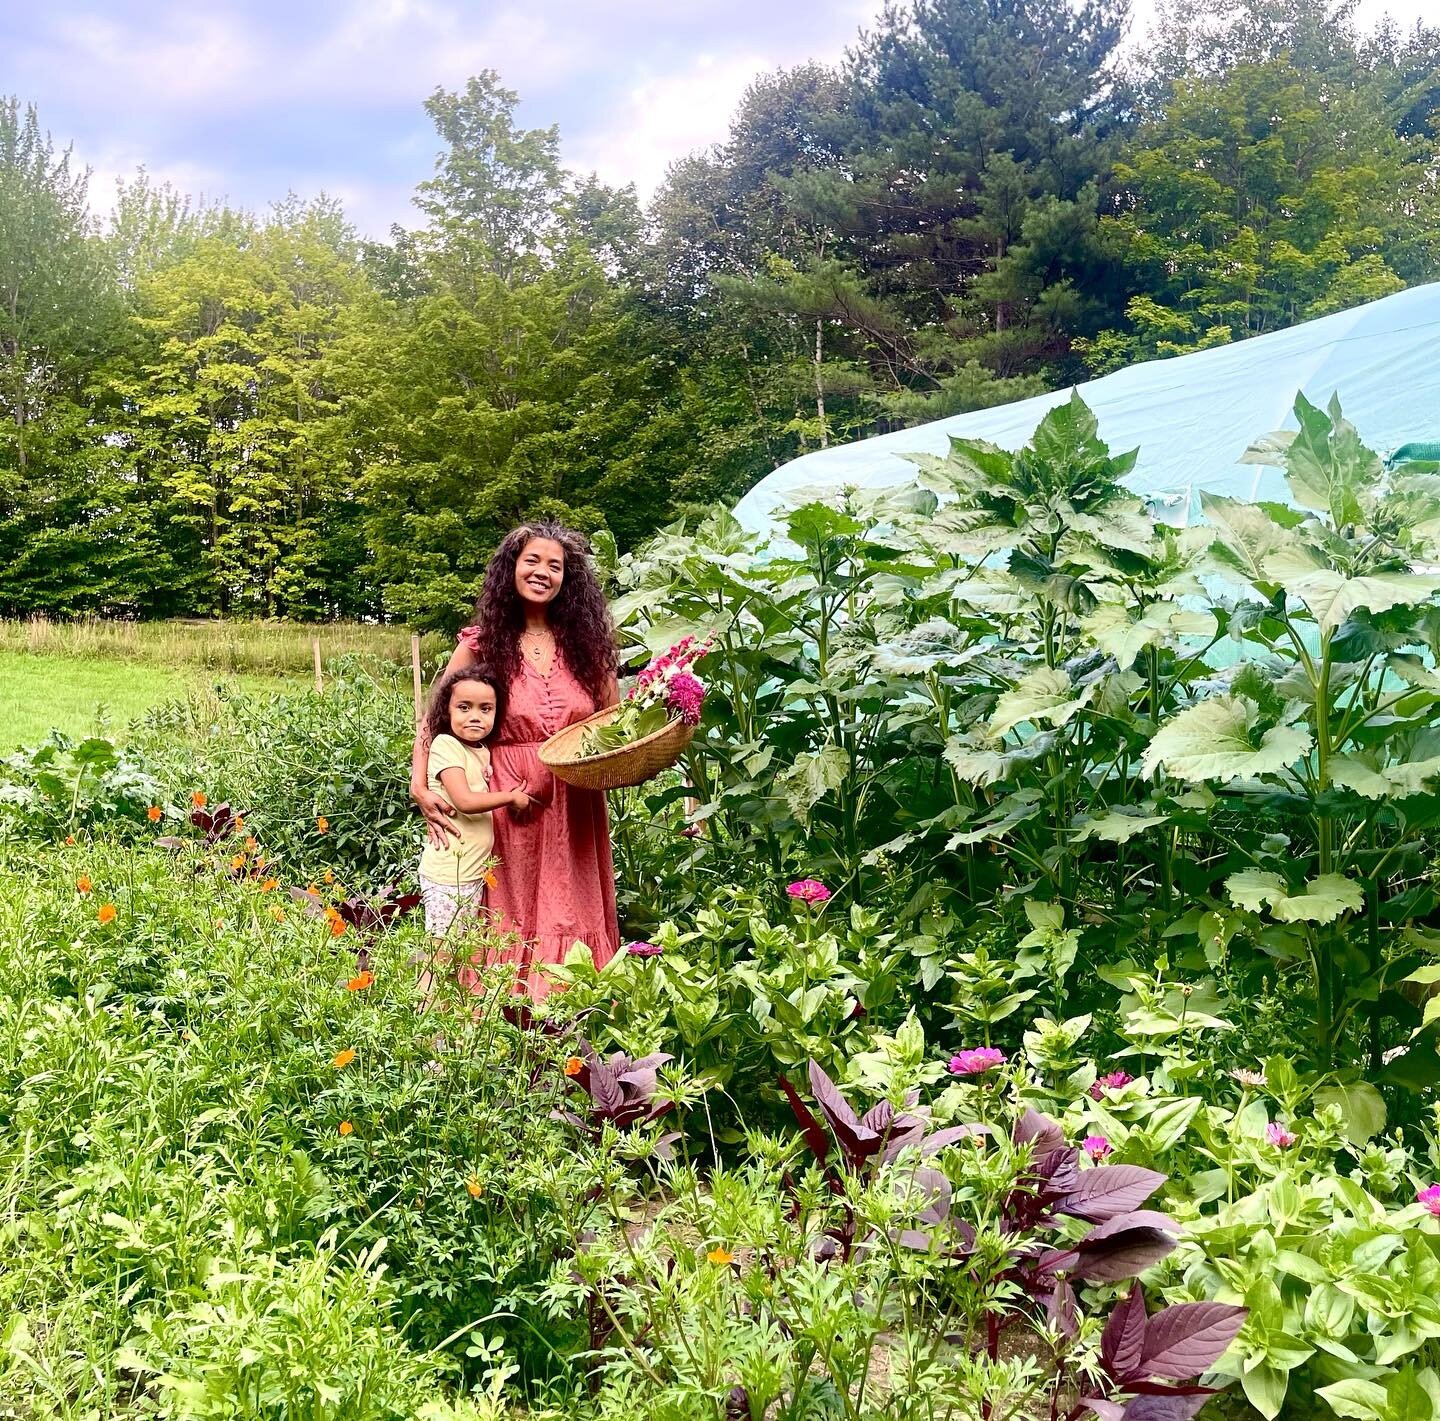 Gone Gardening 🌱
&bull;
Hi 🙋🏽&zwj;♀️ I&rsquo;ve been living my best gardening life this summer, putting in my first real garden. &bull;
A vision many, many years in the making! Hands in the dirt, bare feet to the ground.
&bull;
Terrestrial healing